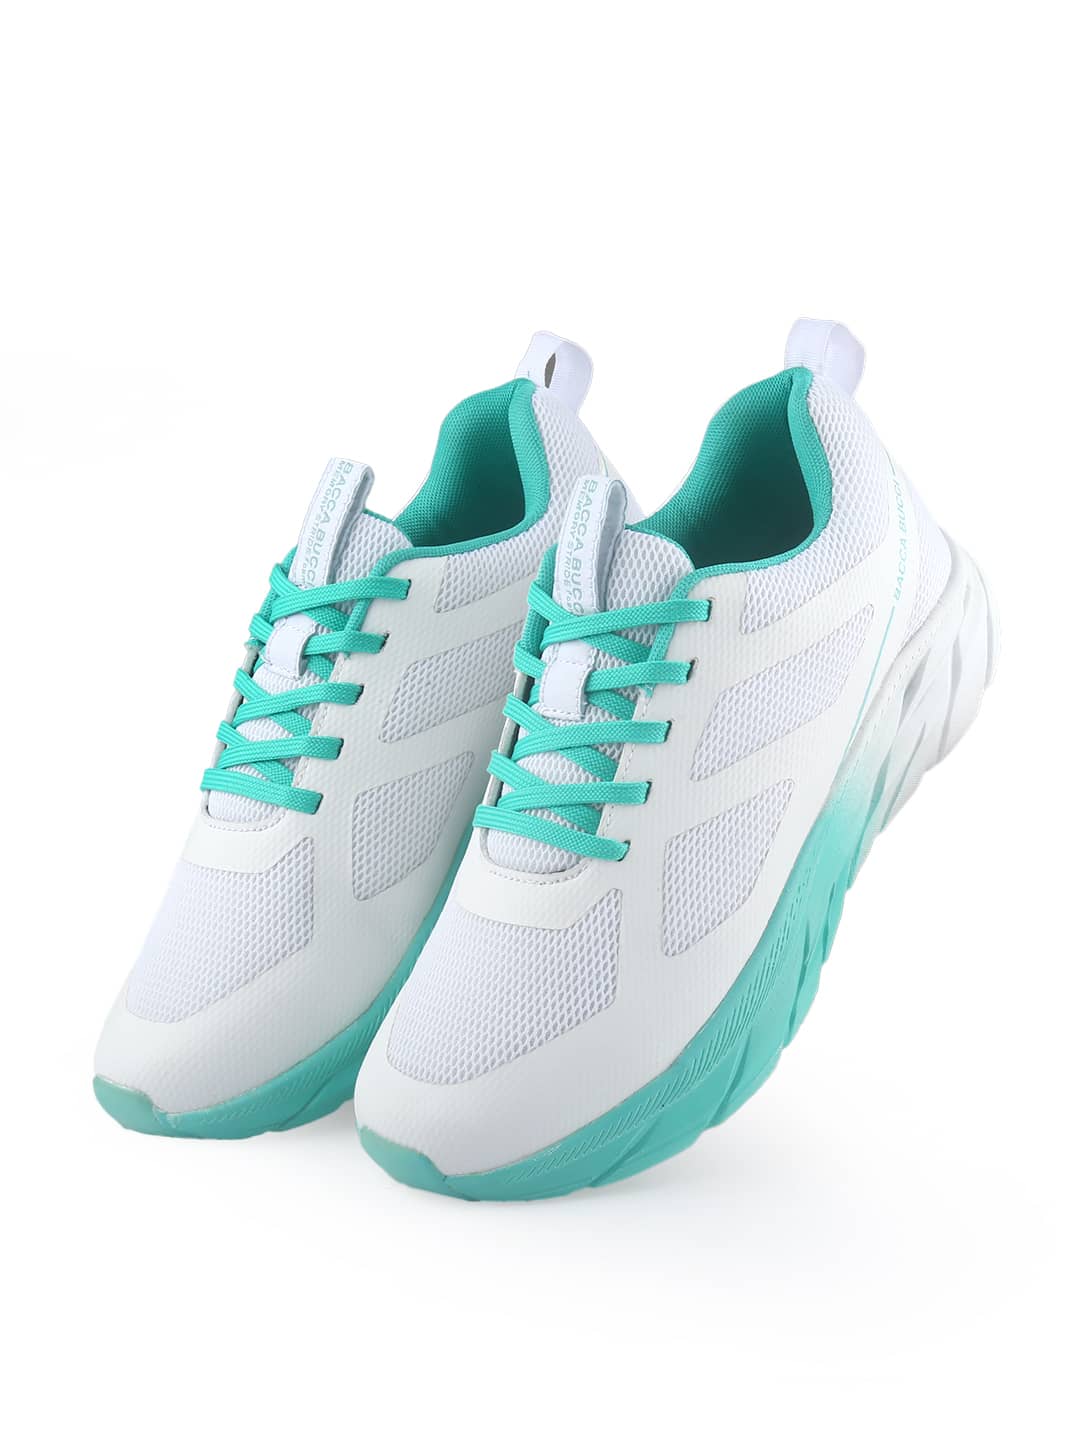 Bacca Bucci Sprint Mystique: High-Performance Women's Athletic Sneakers with Breathable Mesh Upper, Adaptive Fit Lacing System, and Superior Traction Sole